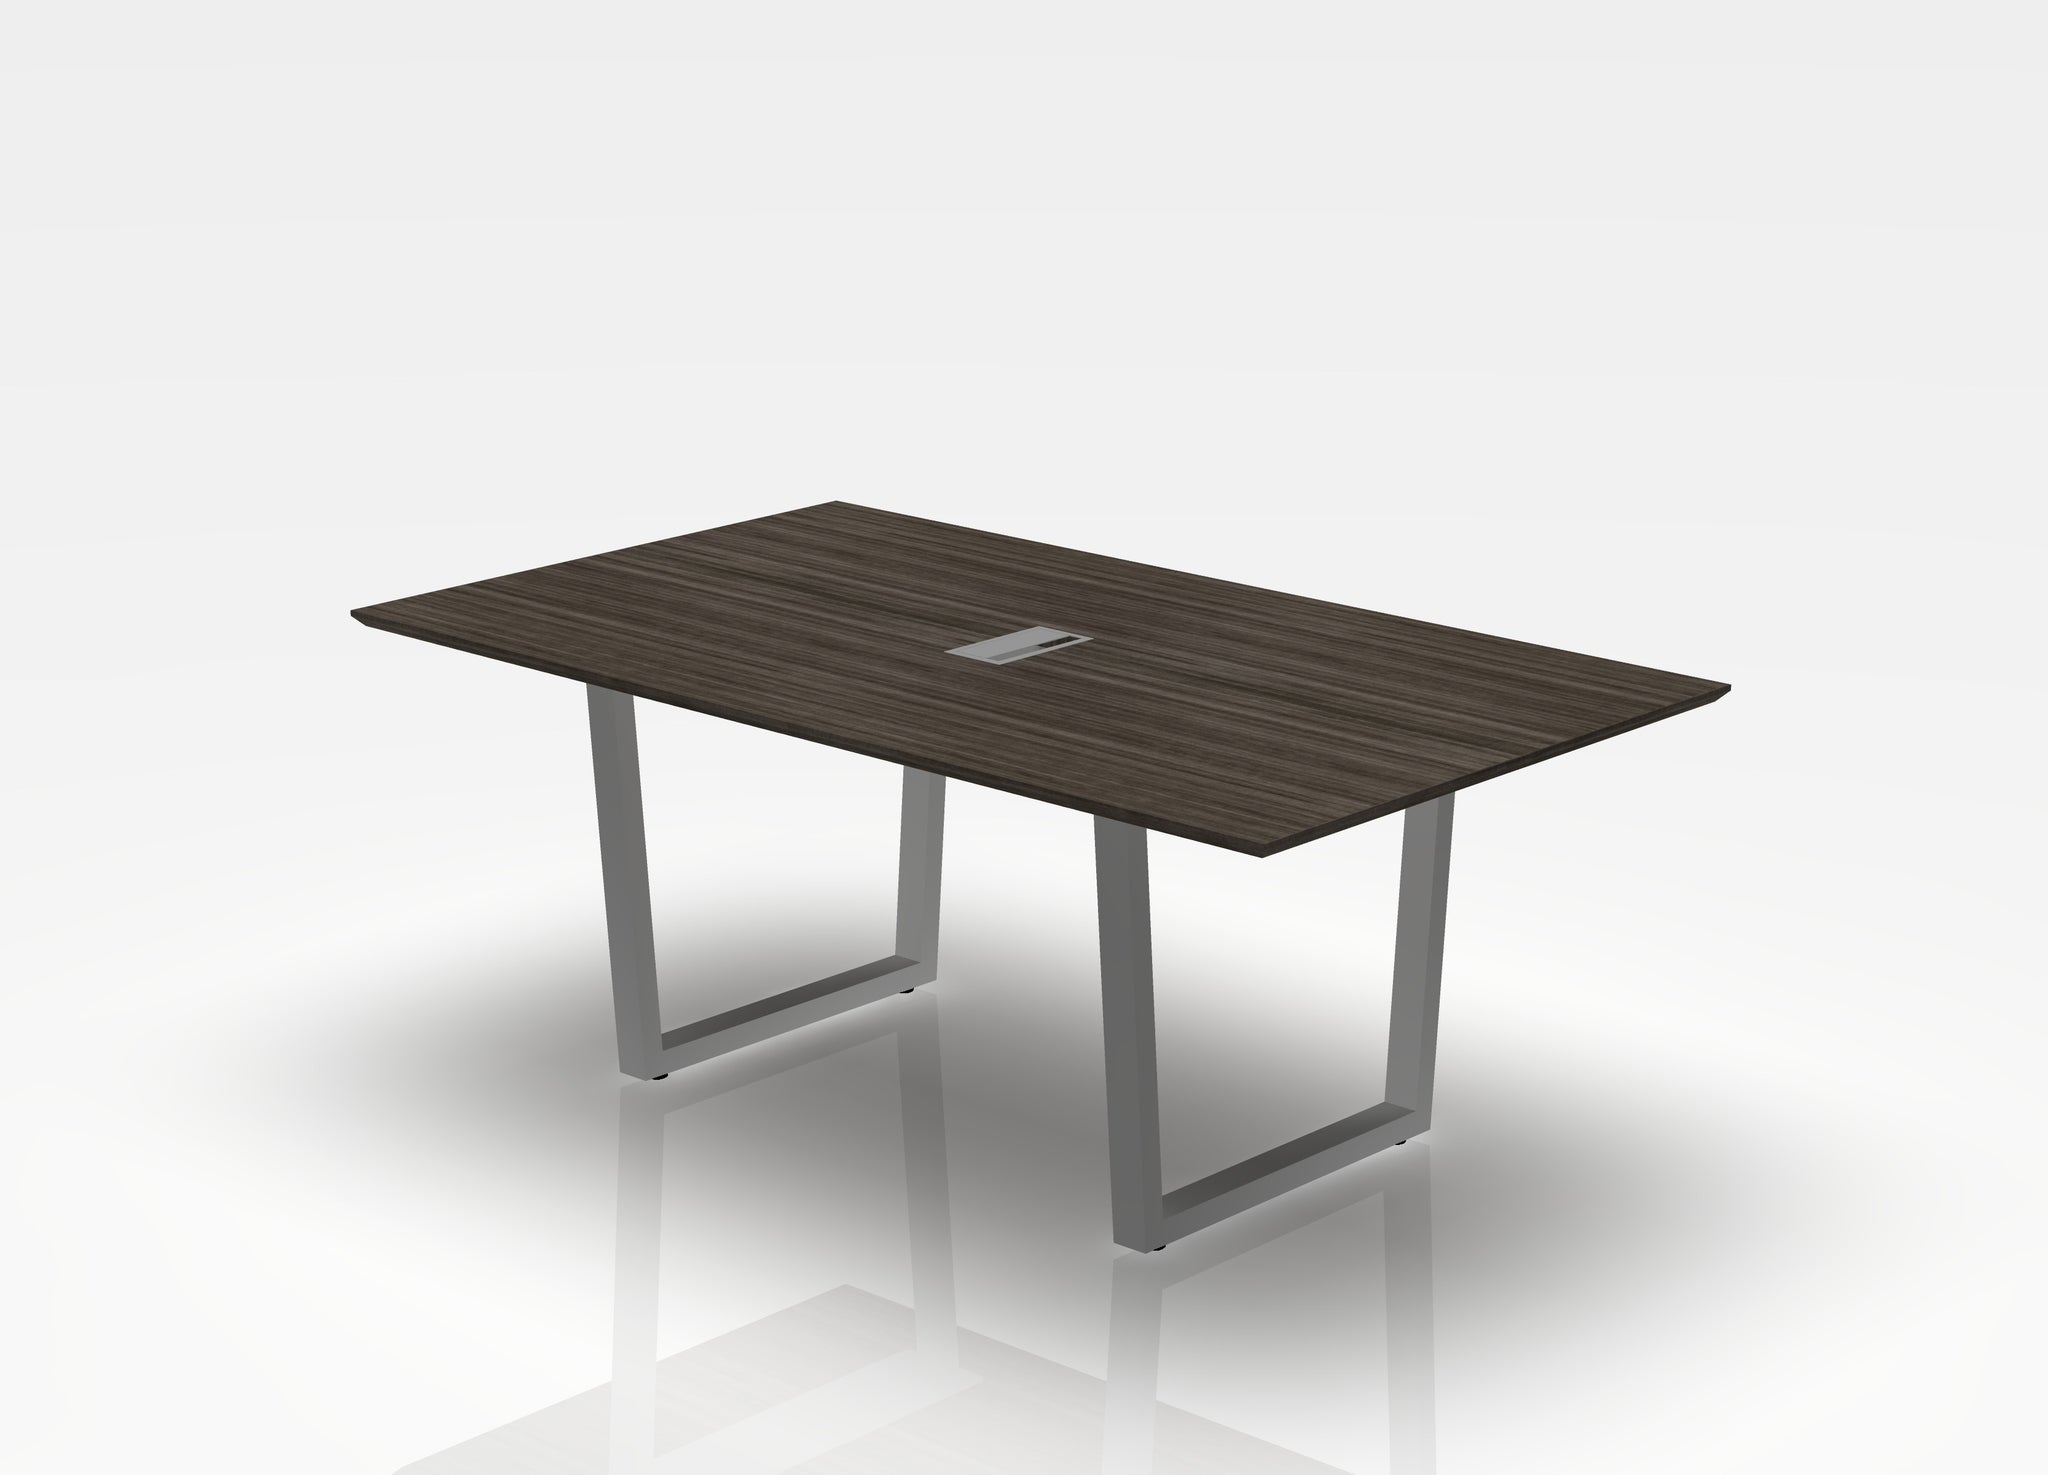 THREE60 Conference Table – Sleigh Leg